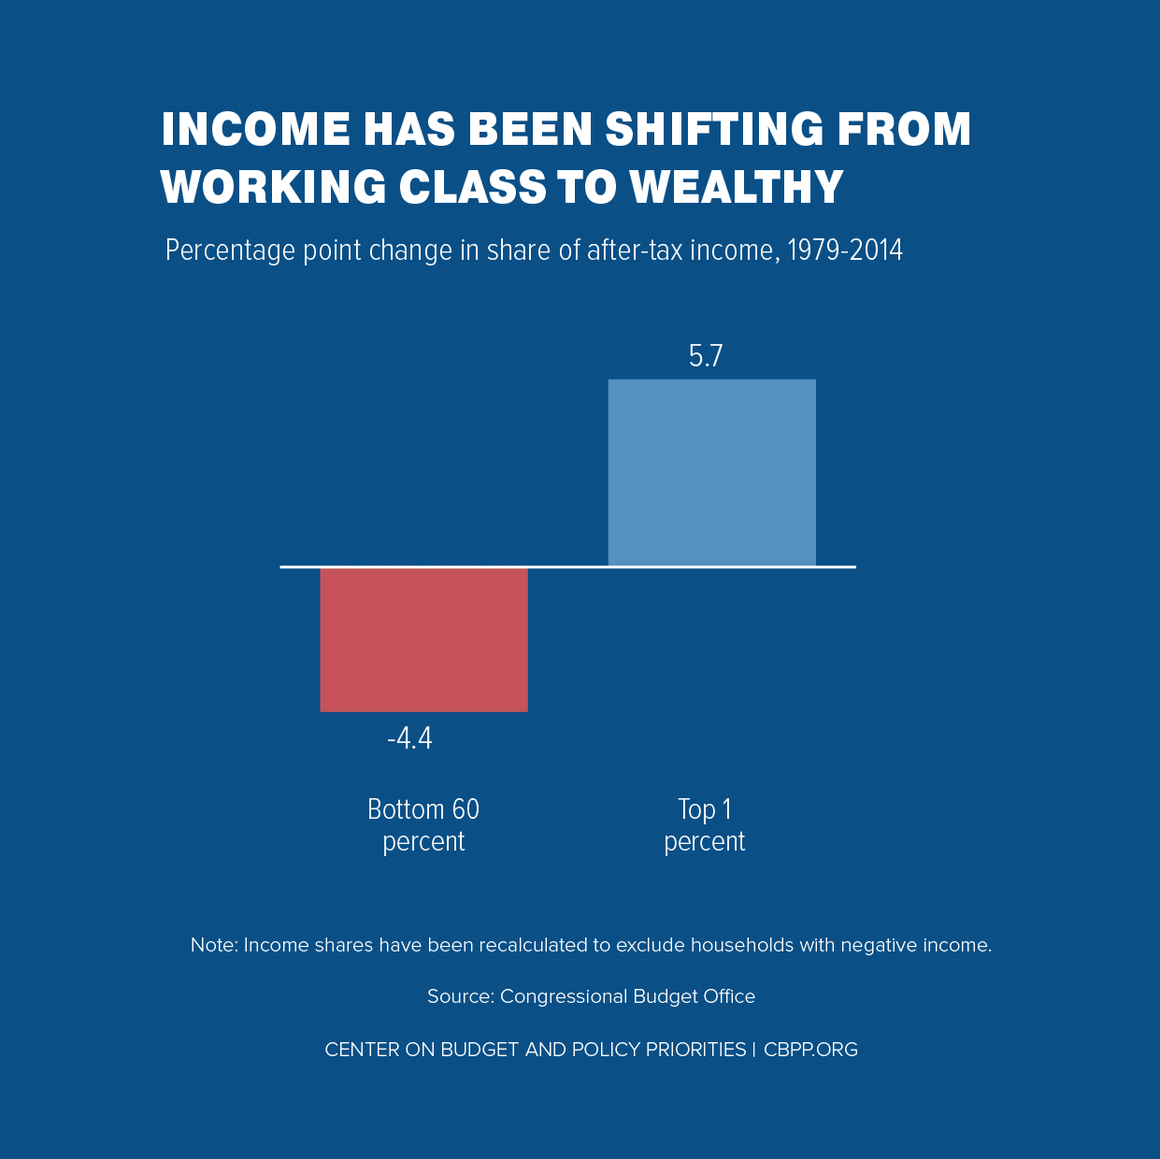 Income Has Been Shifting From Working Class to Wealthy